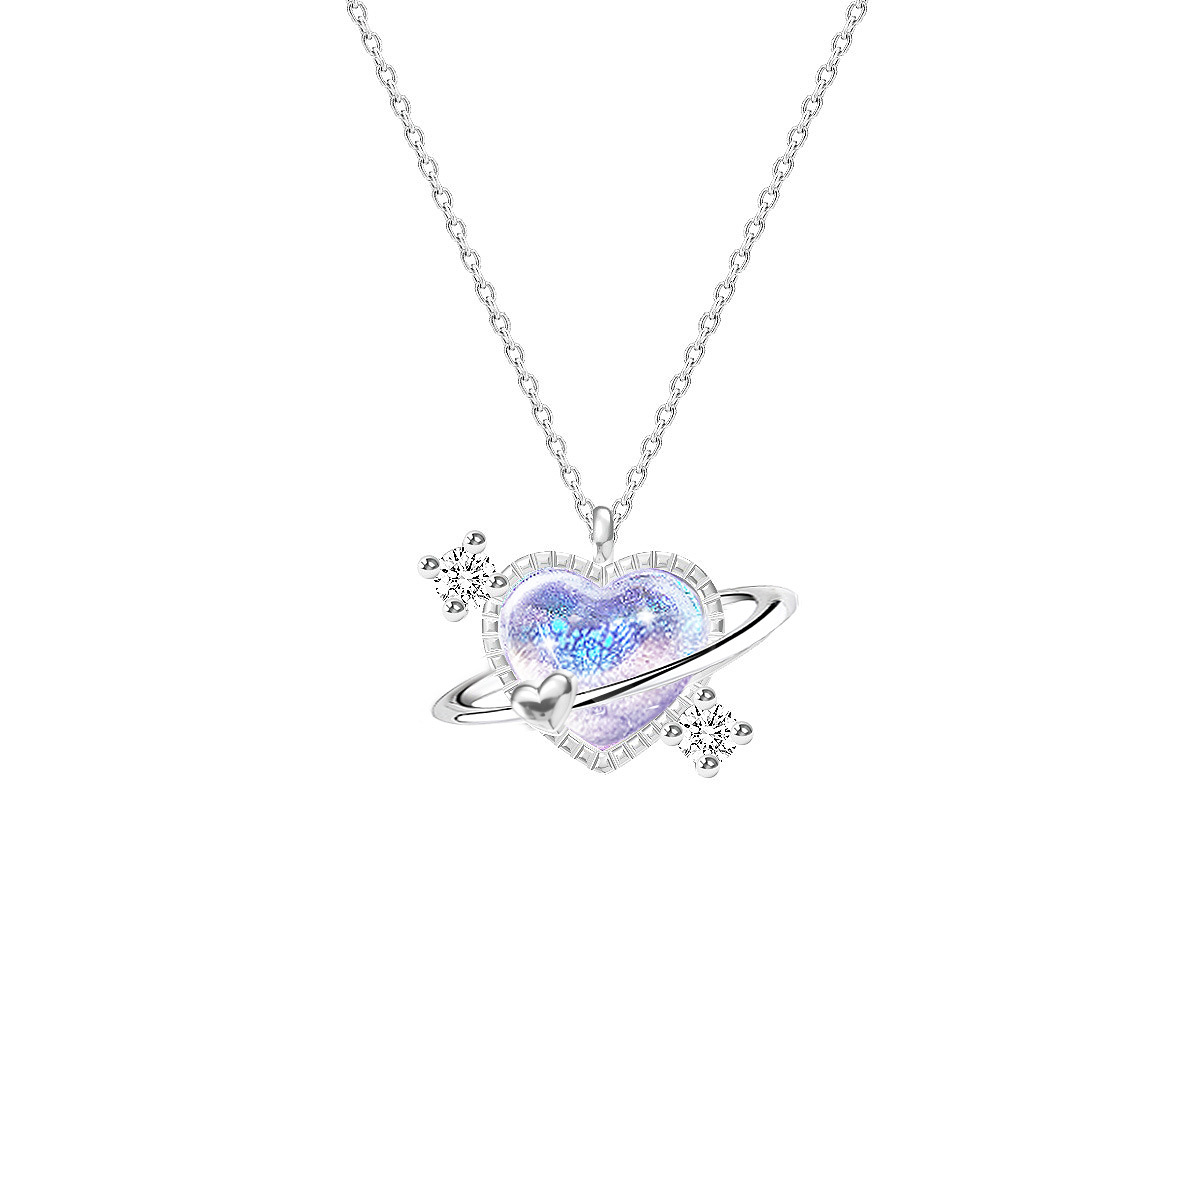 Aurora Series Love Pendant S925 Sterling Silver Necklace